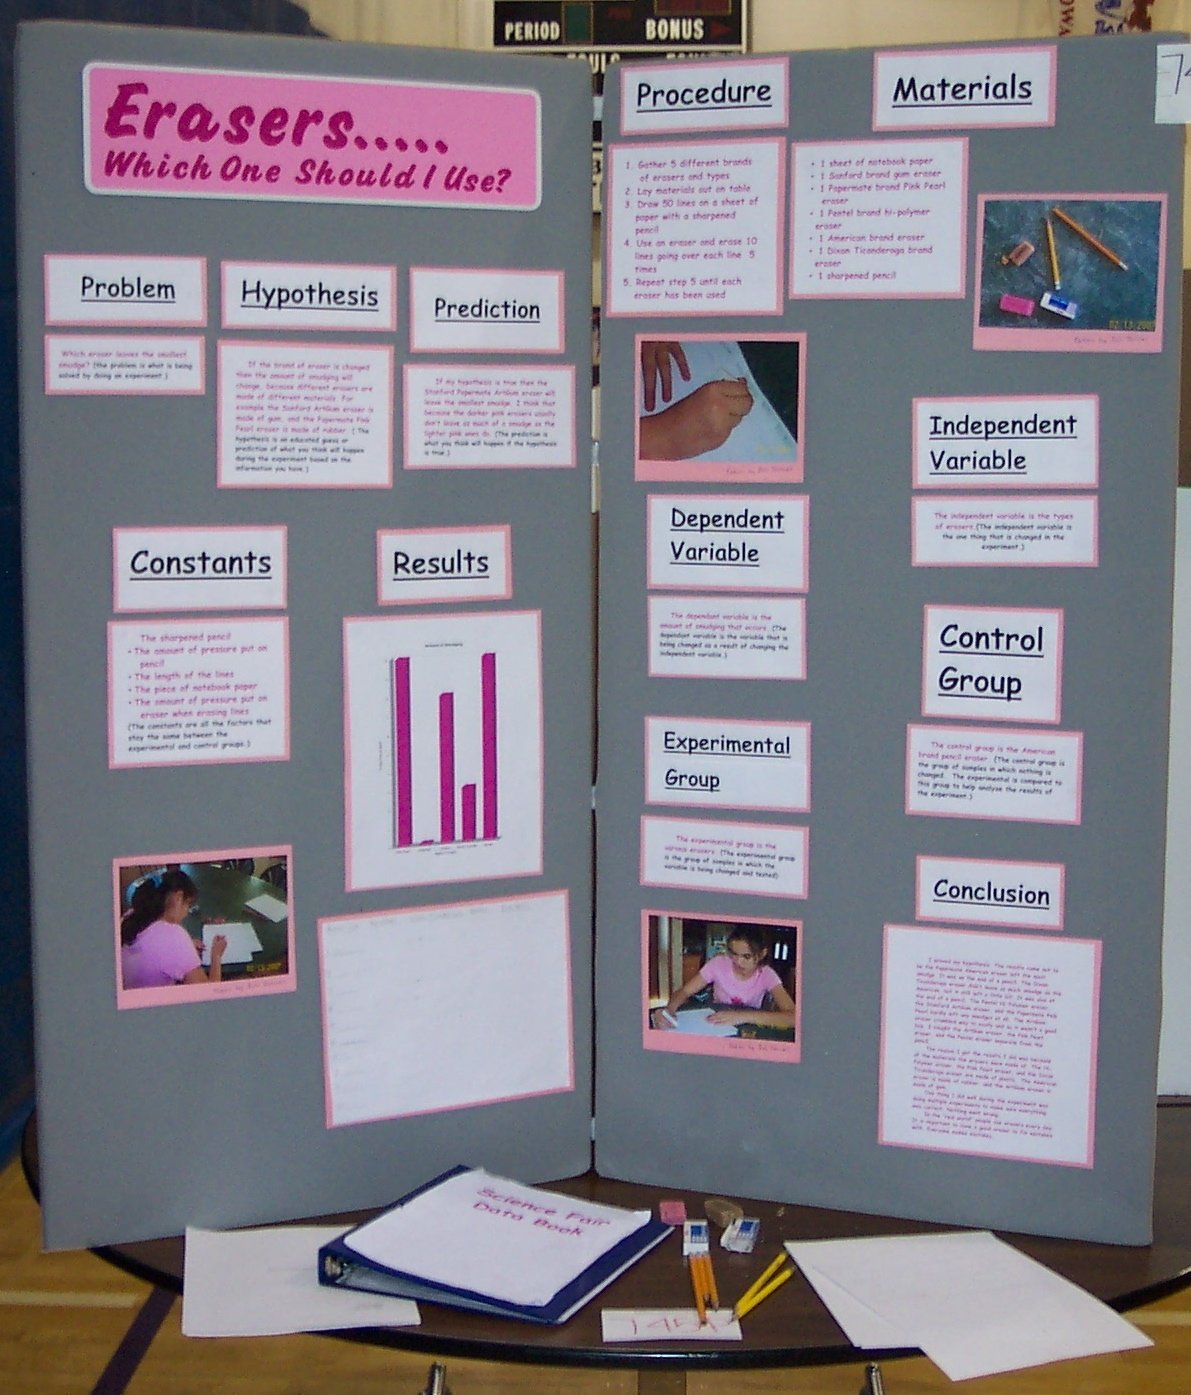 10 Beautiful Science Fair Project Ideas For 8Th Graders 8th grade science project ideas list homeshealth 38 2022